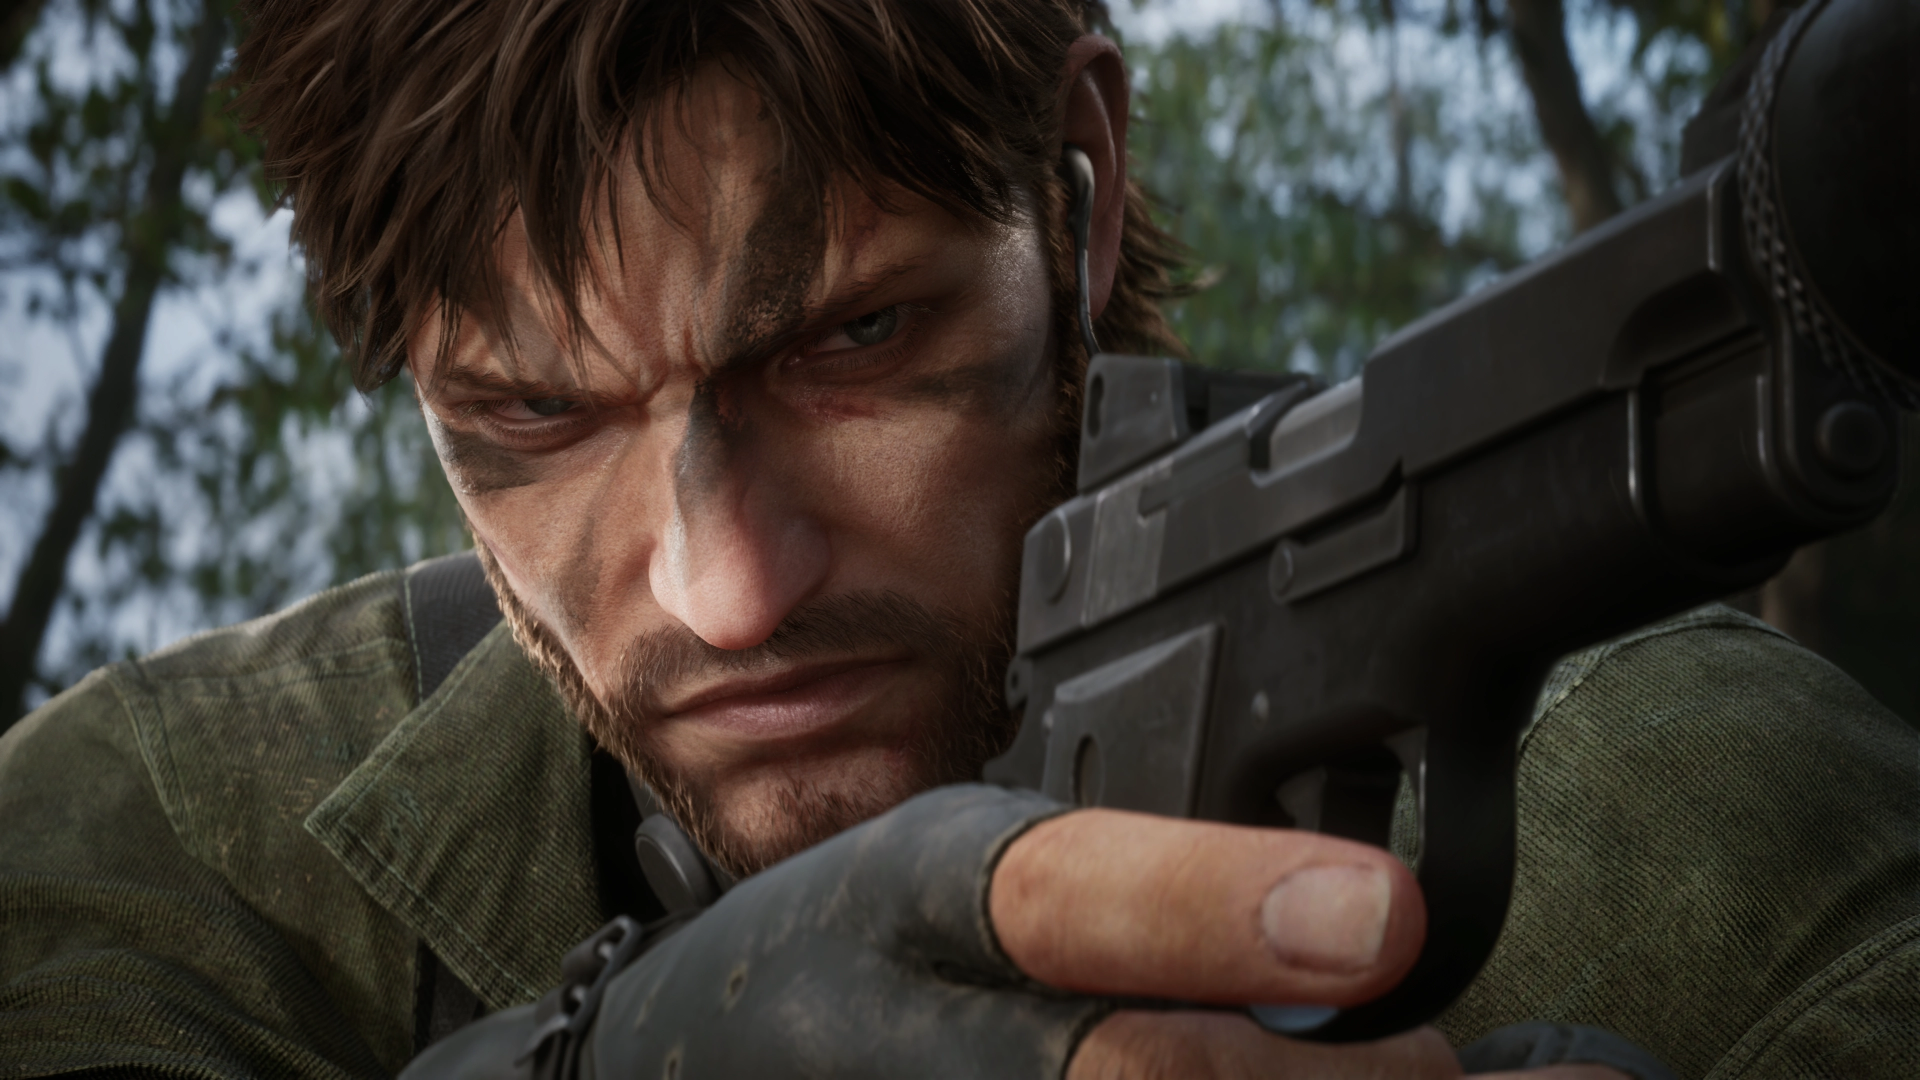 Fans are afraid they’ll turn Snake into a walking corpse after Konami announces that any injuries will ‘leave their mark permanently’